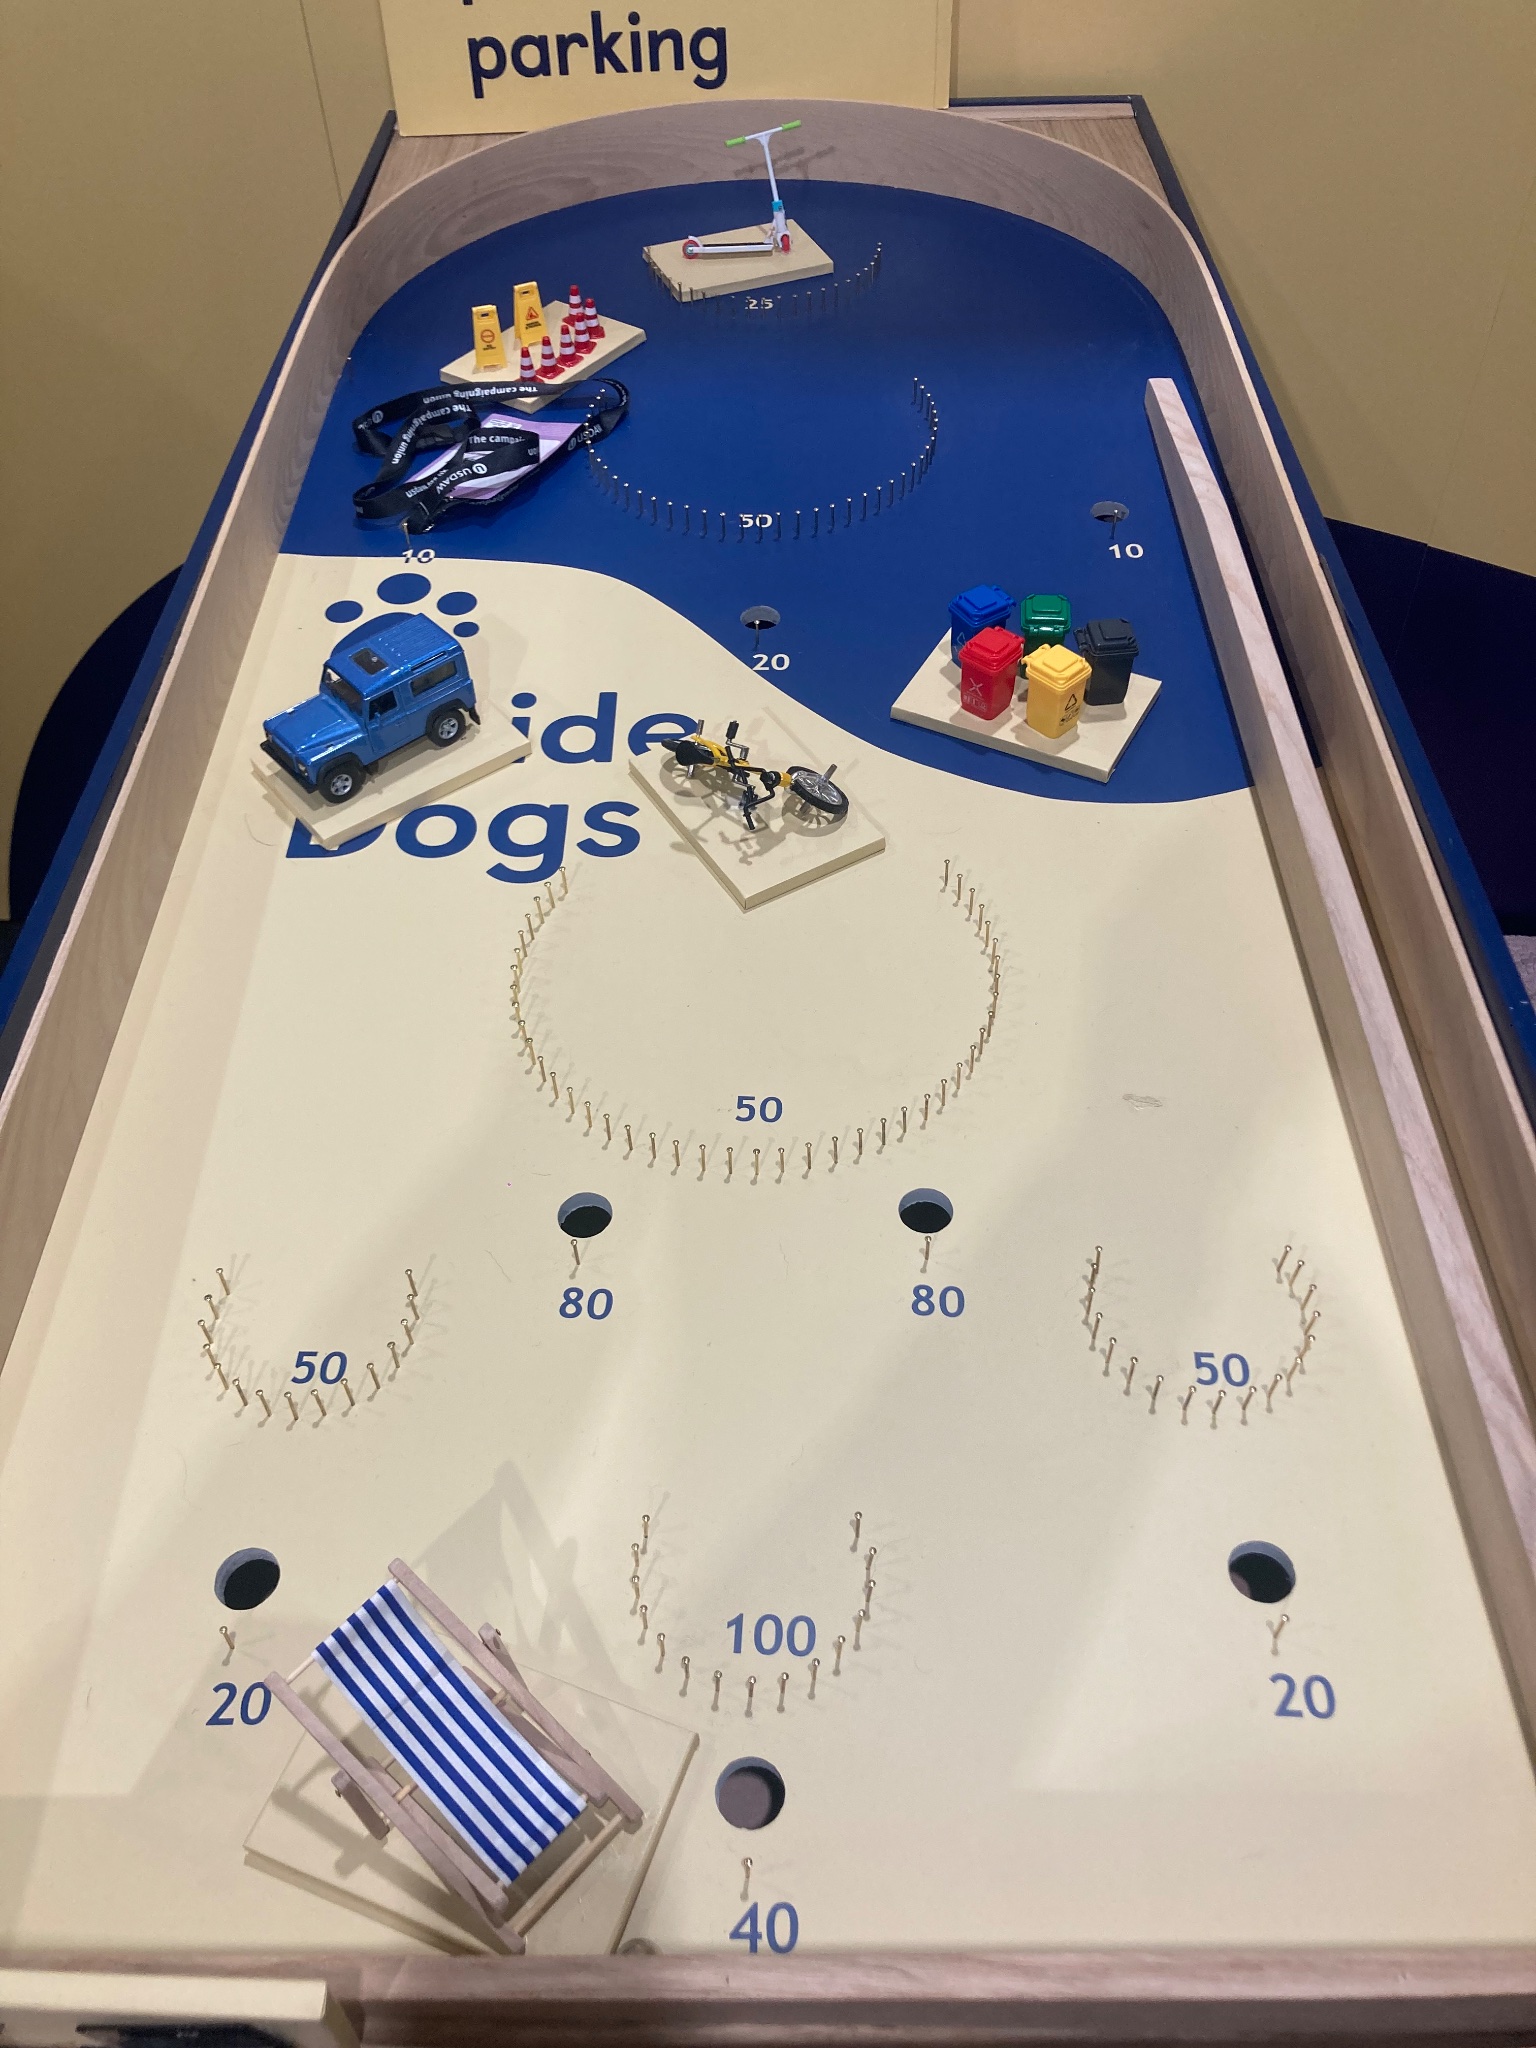 Photo of the Guide Dogs party conference pinball game, the board is yellow and blue and features the Guide Dogs logo. There are various scoring zones marked with pins and numbers indicating the potential score. Placed on the pinball board are obstacles which prevent people with a vision impairment from being able to access the world, such as pavement parking, street clutter, bins left on pavements and dockless bikes and e-scooters. 